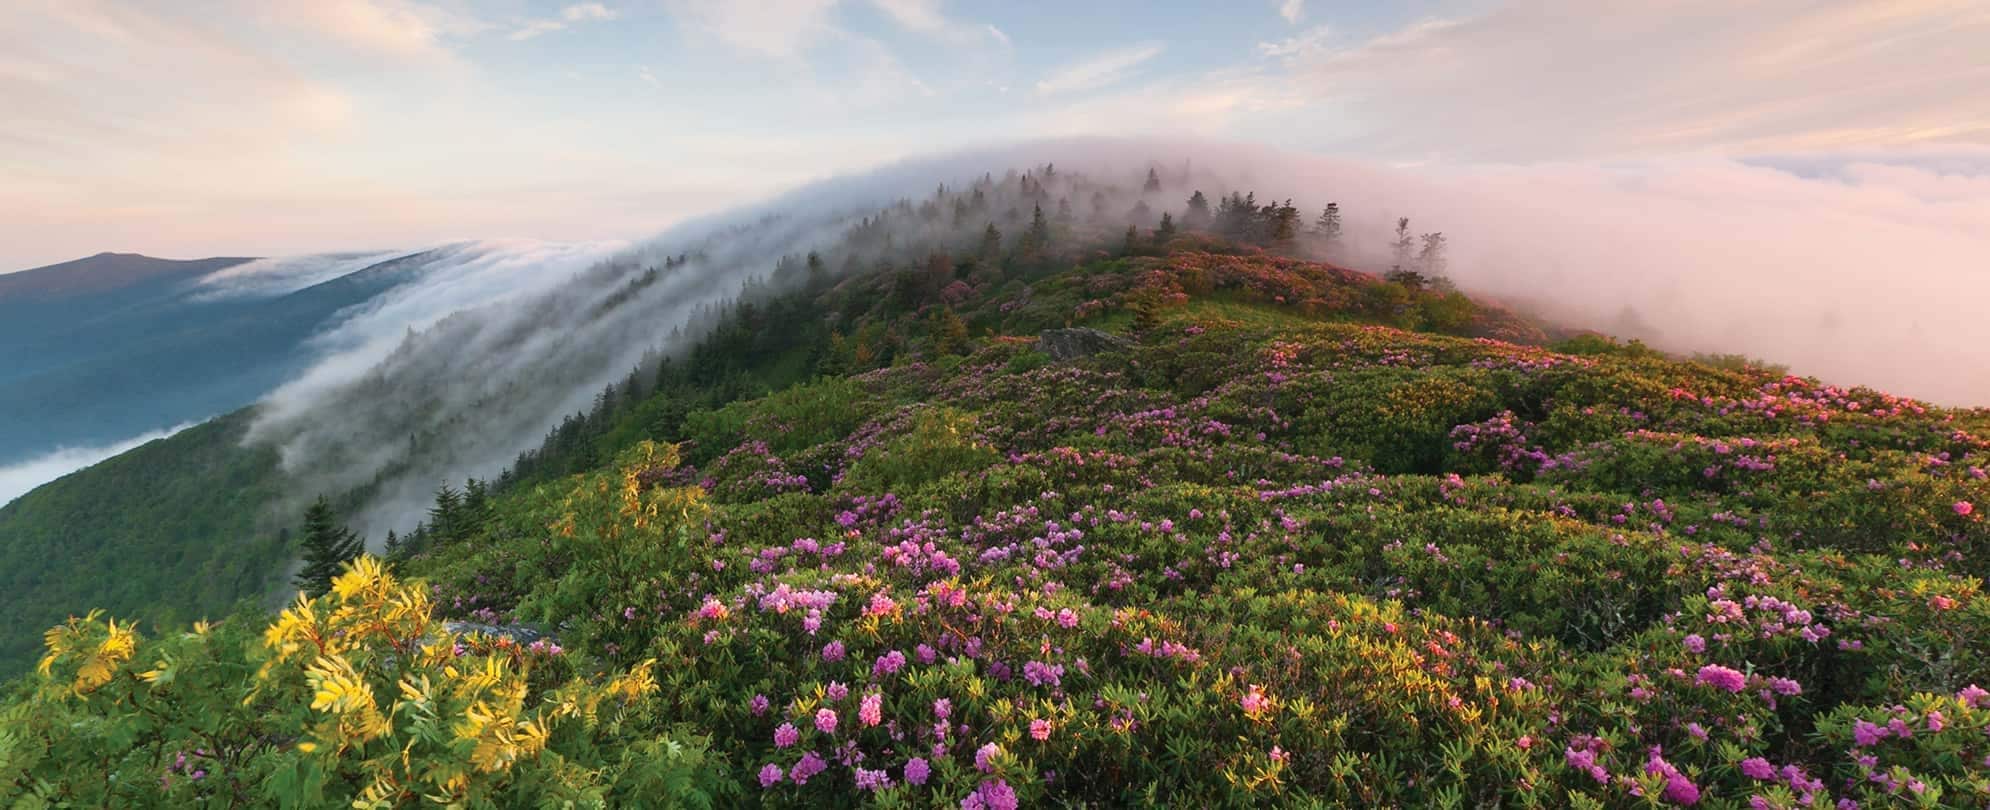 The top of the Great Smoky Mountains in Tennesse covered in colorful wildflowers and a light blanket of clouds 